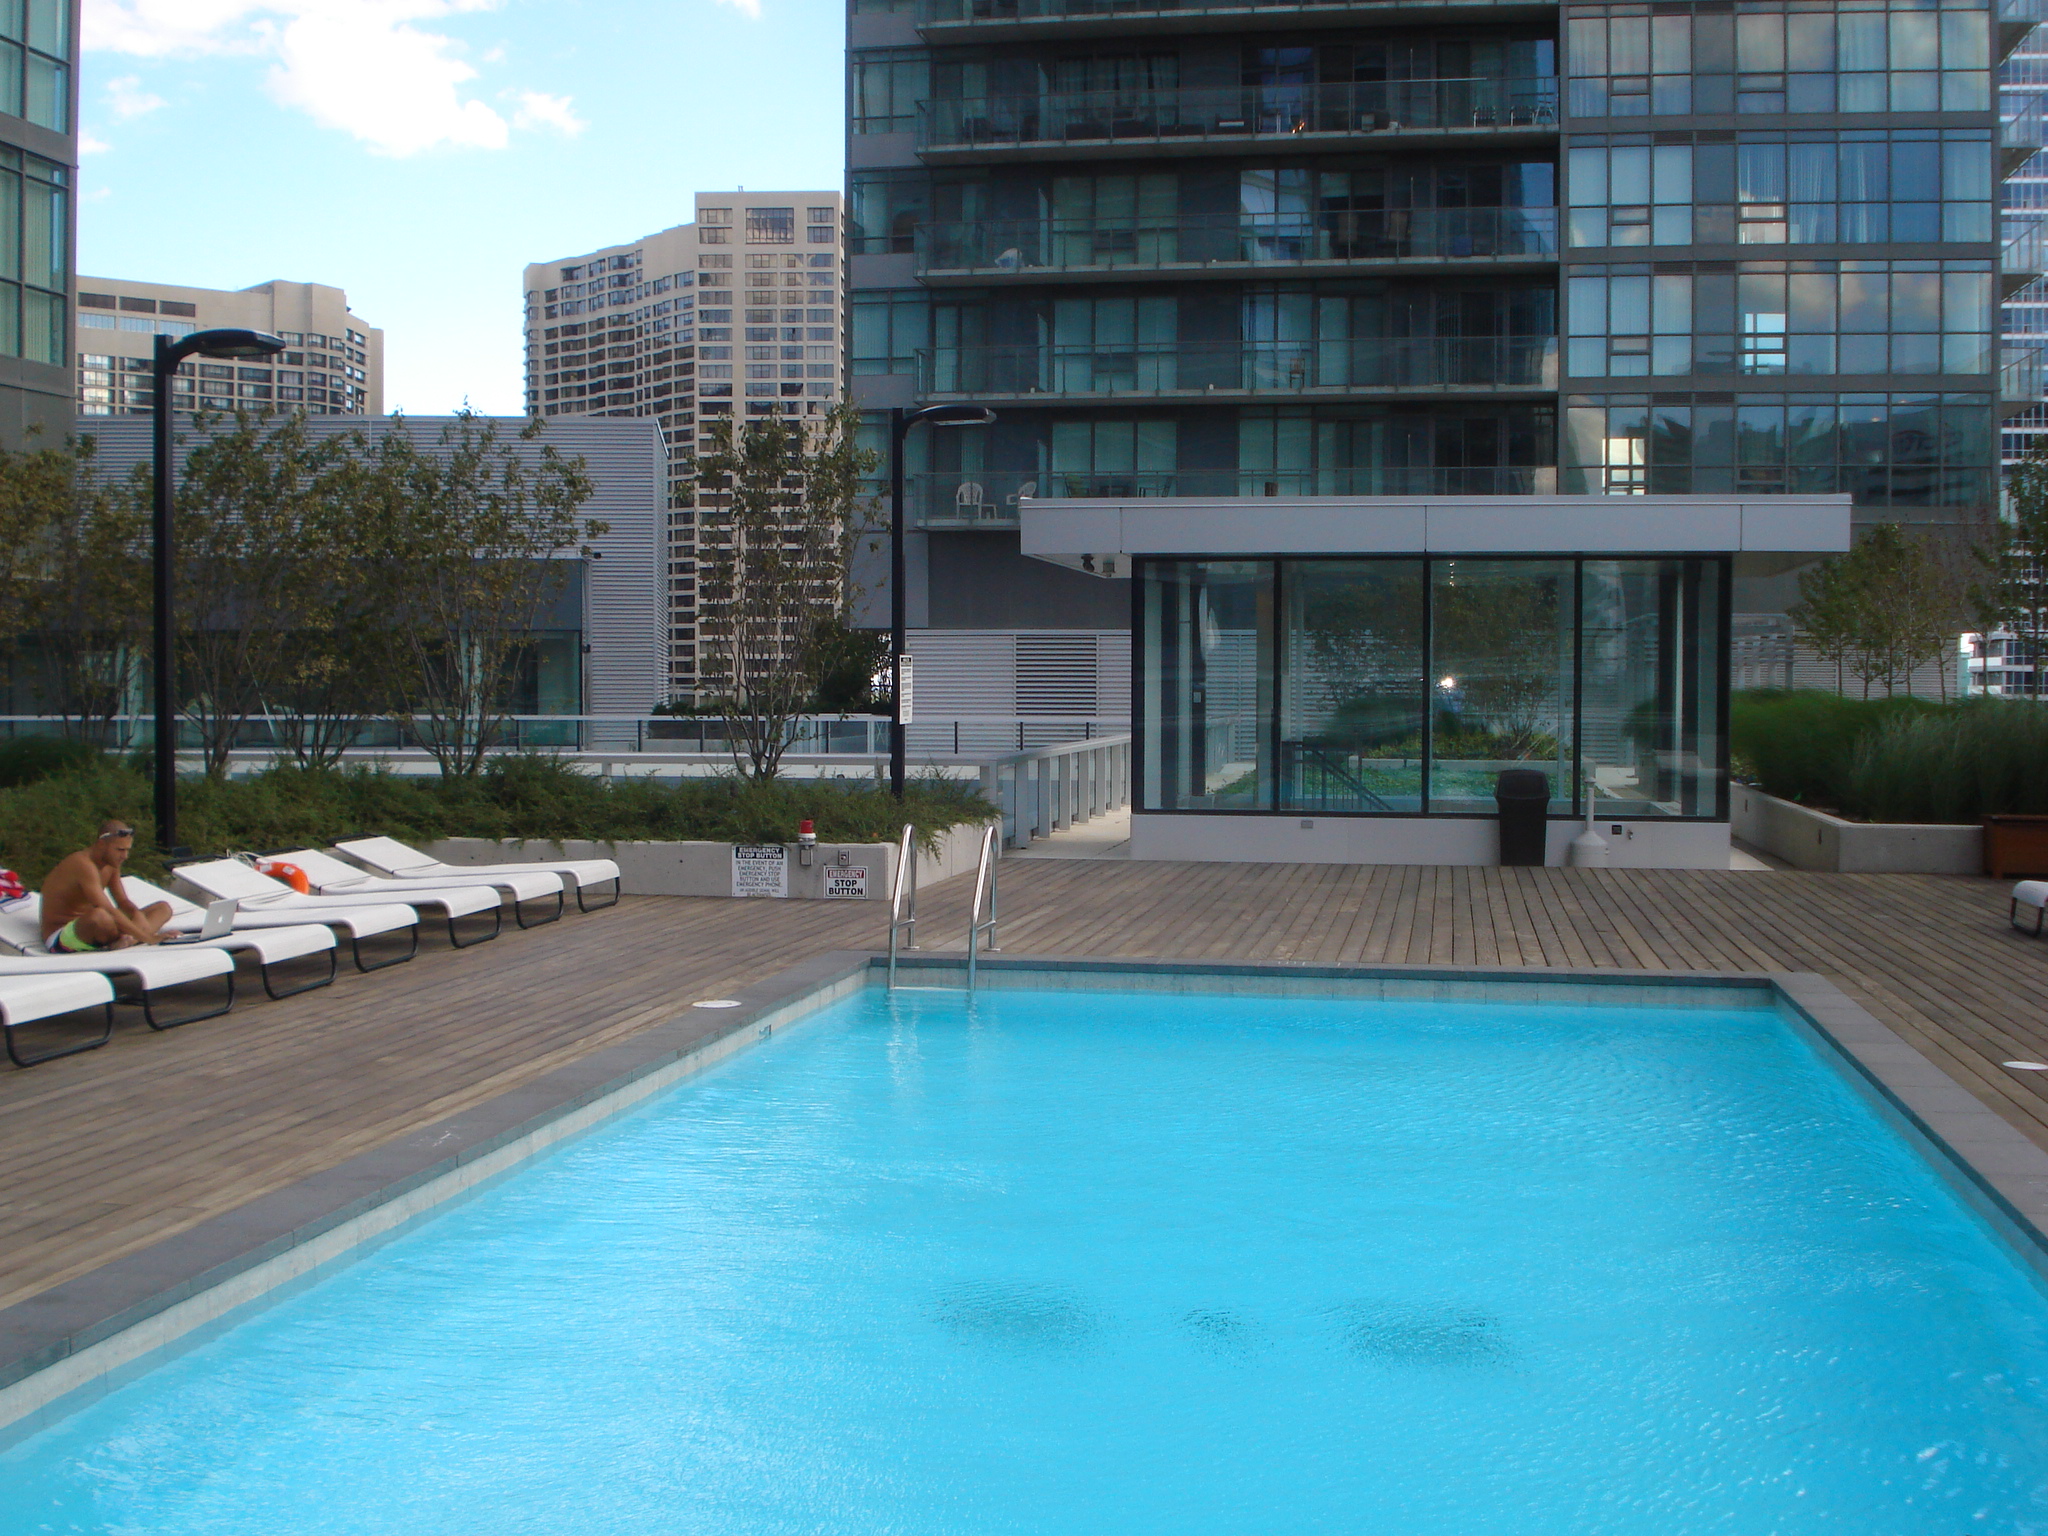 Full Access to Outdoor Pool